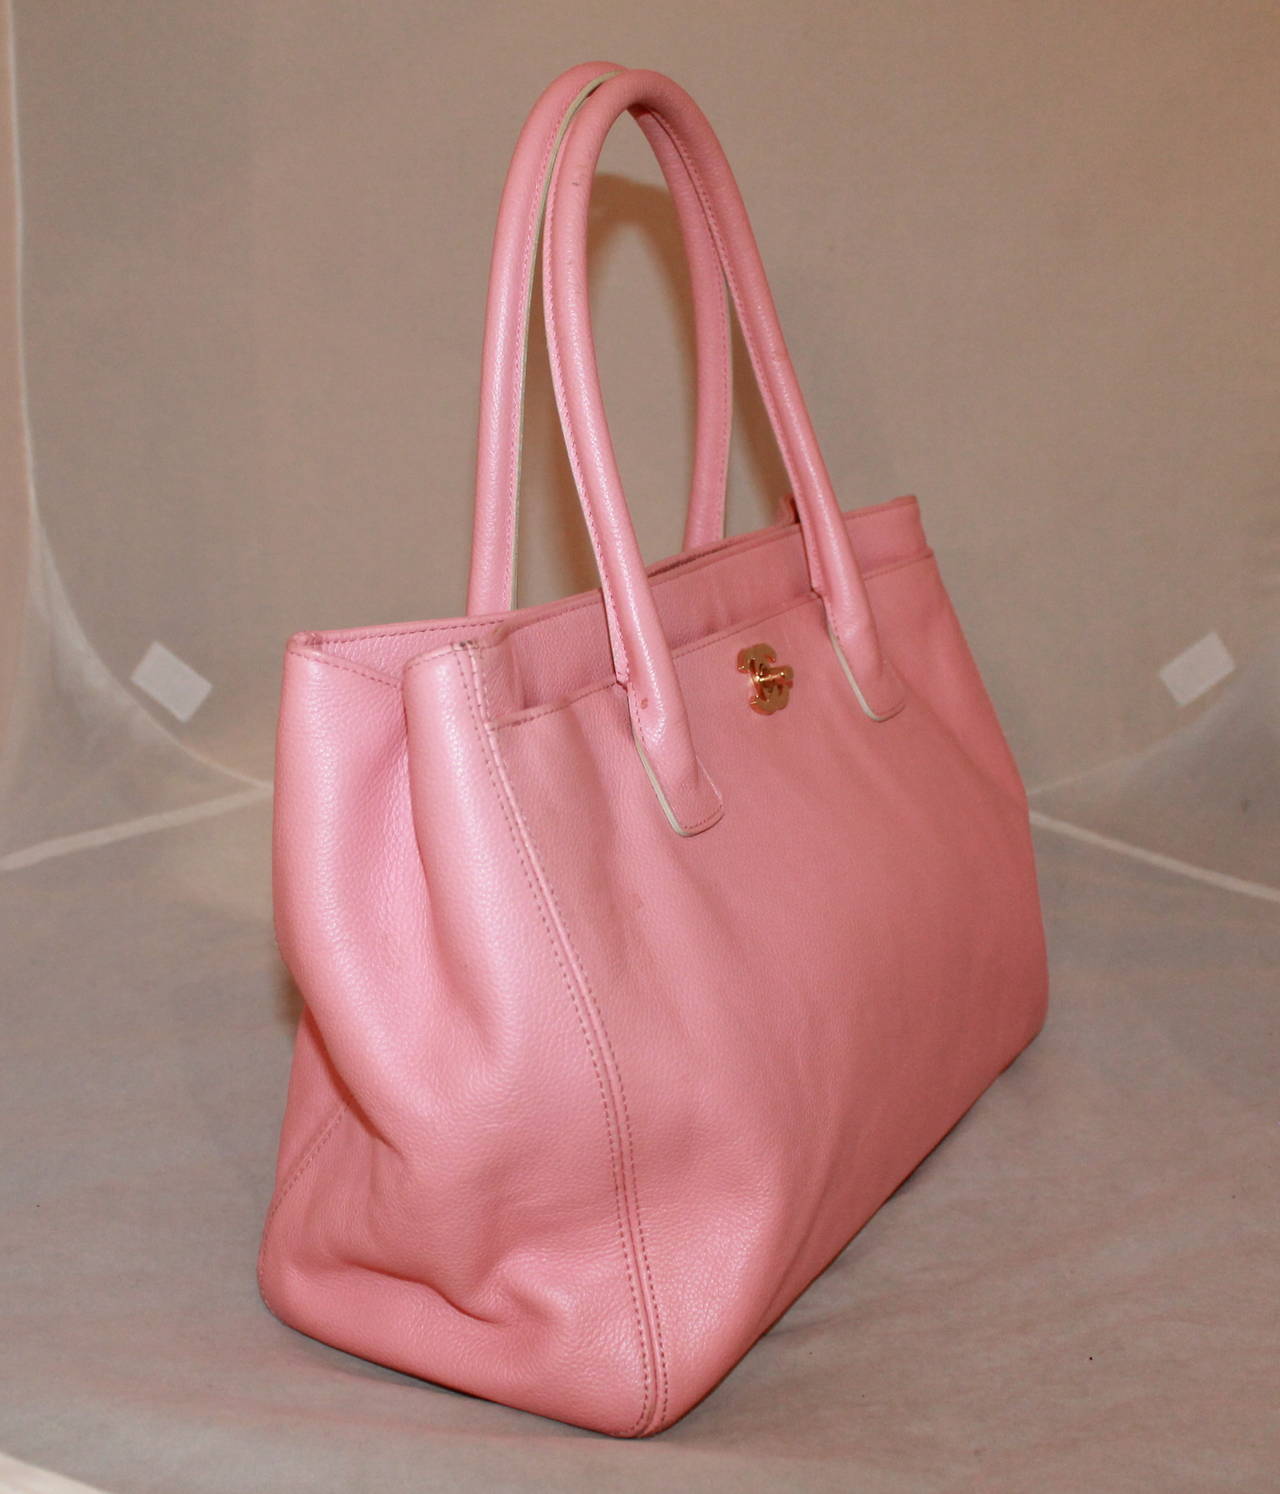 Chanel Vintage Pink Caviar Leather Tote - circa 2005. This bag is in average condition with noticeable wear on the leather and corners. 

Measurements:
Length- 9.5